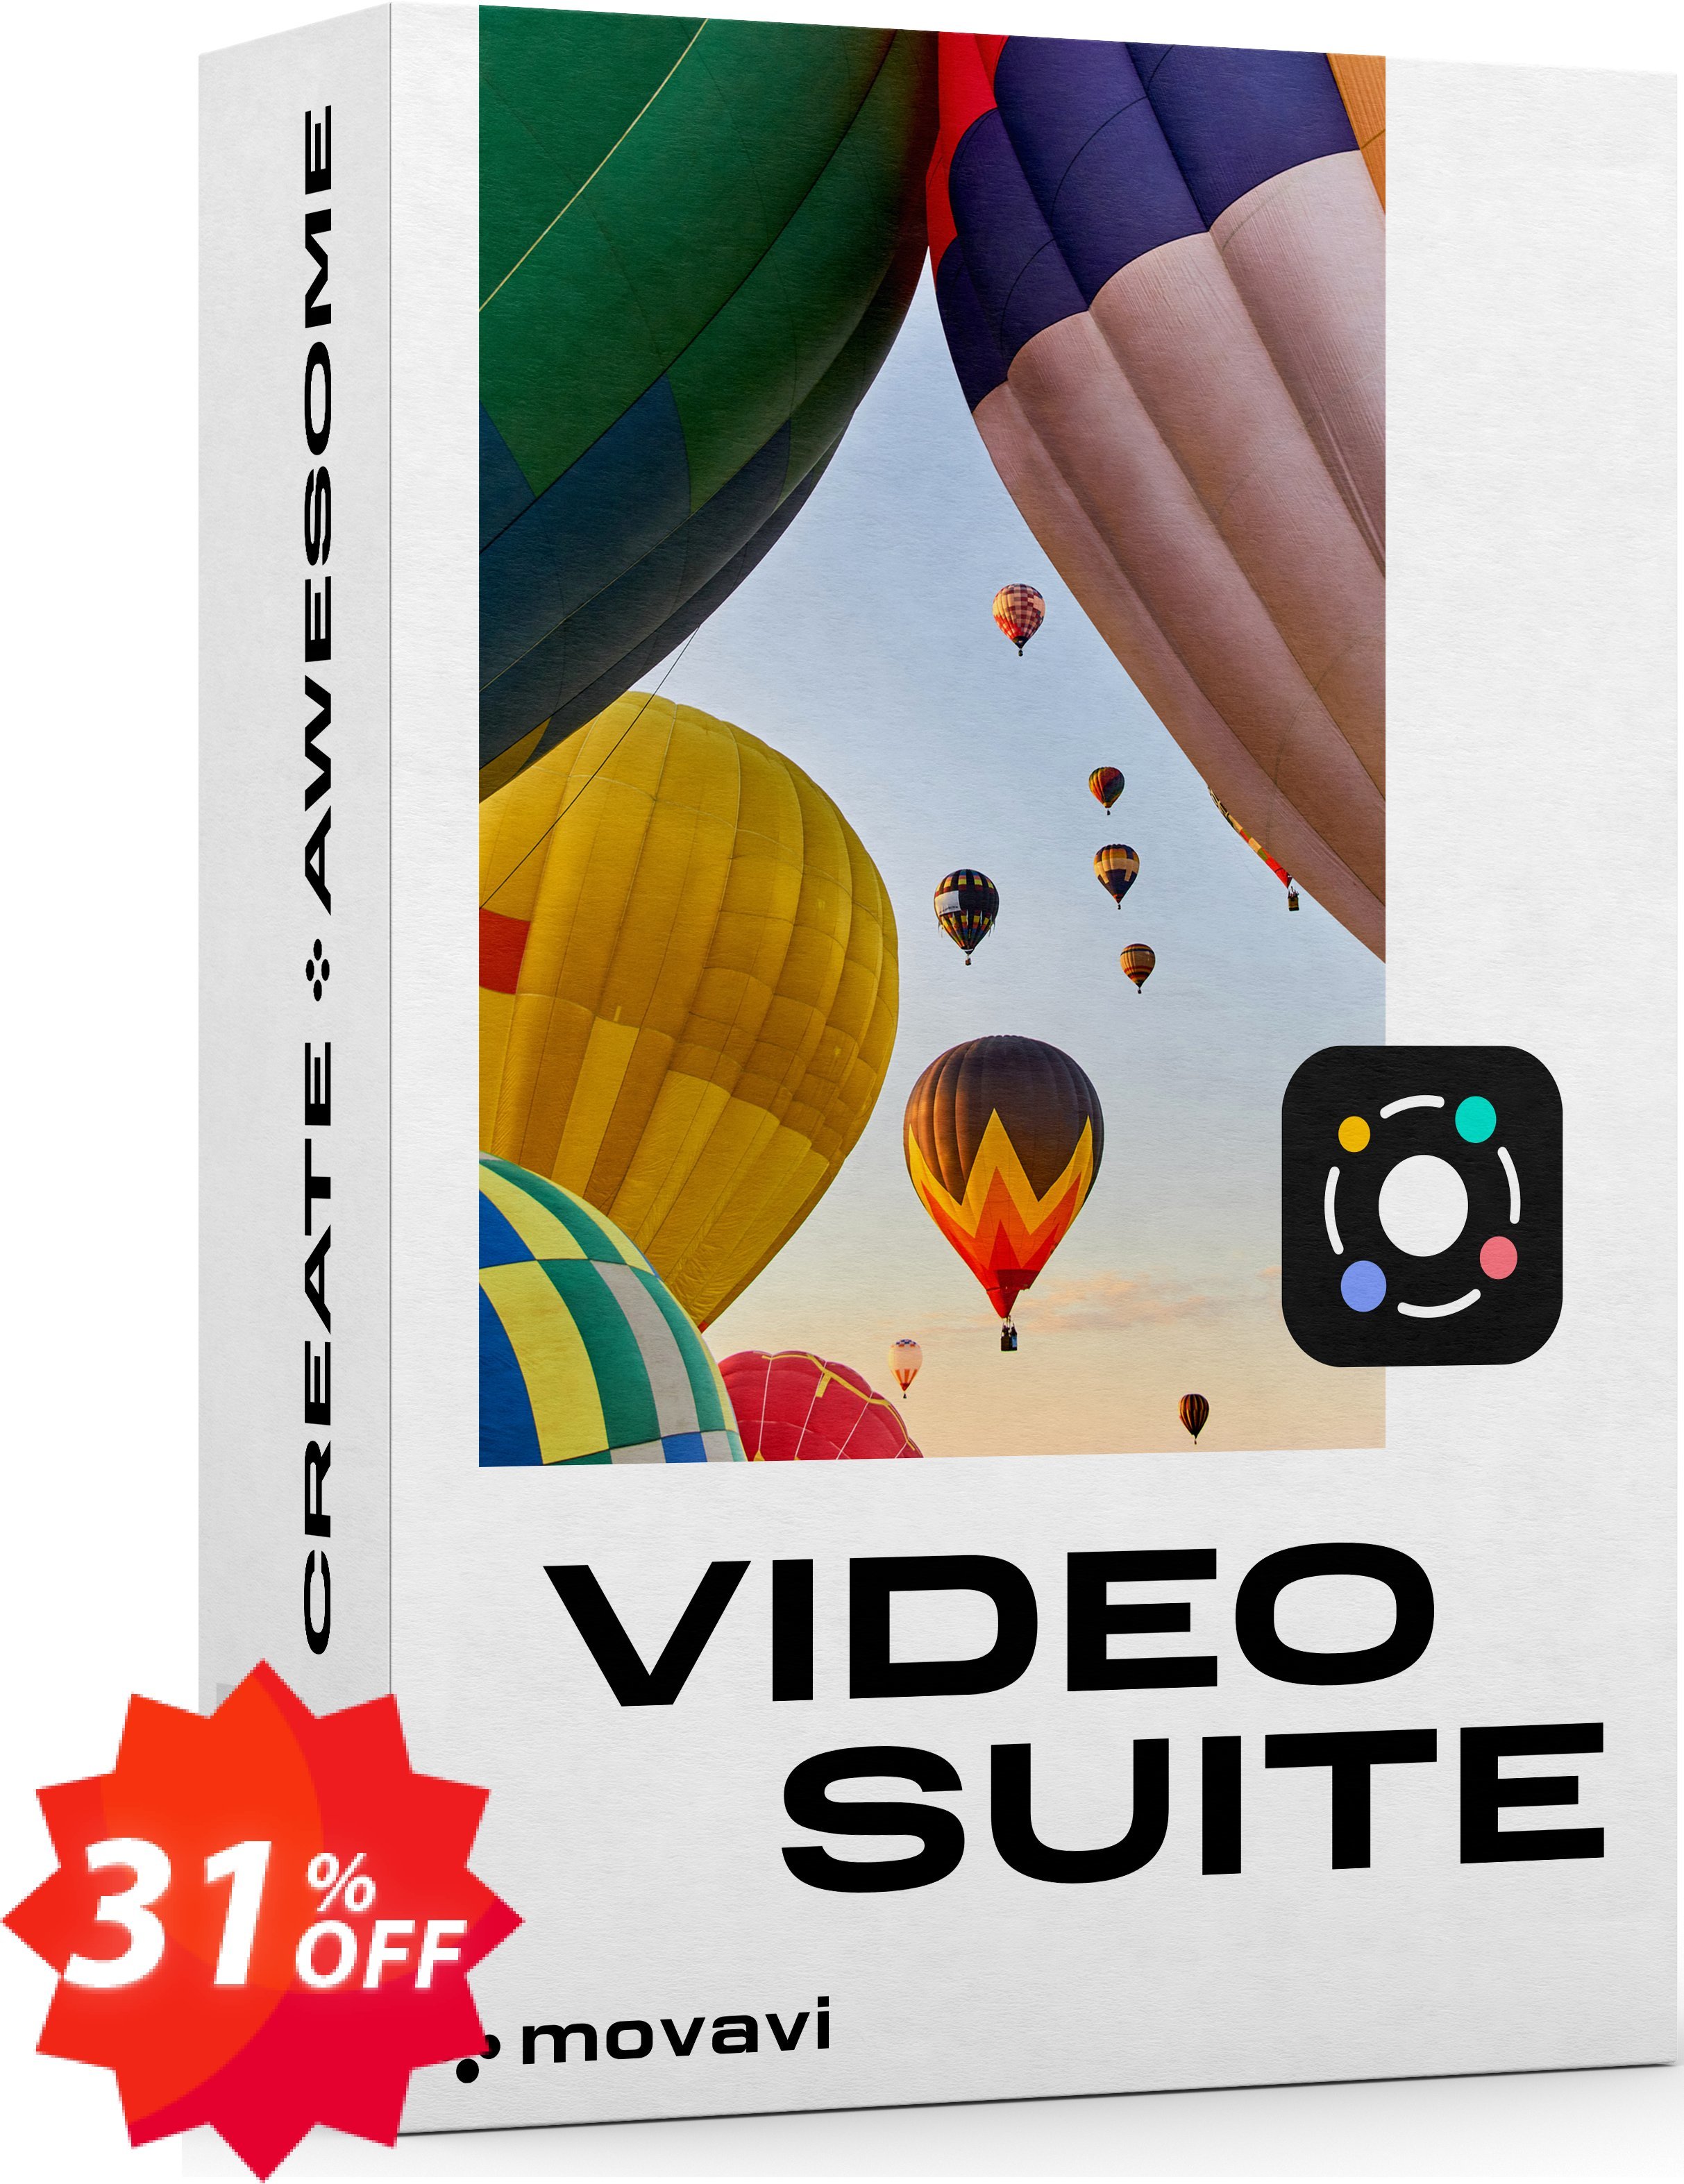 Movavi Bundle: Video Suite for MAC + Valentine's Day Pack Coupon code 31% discount 